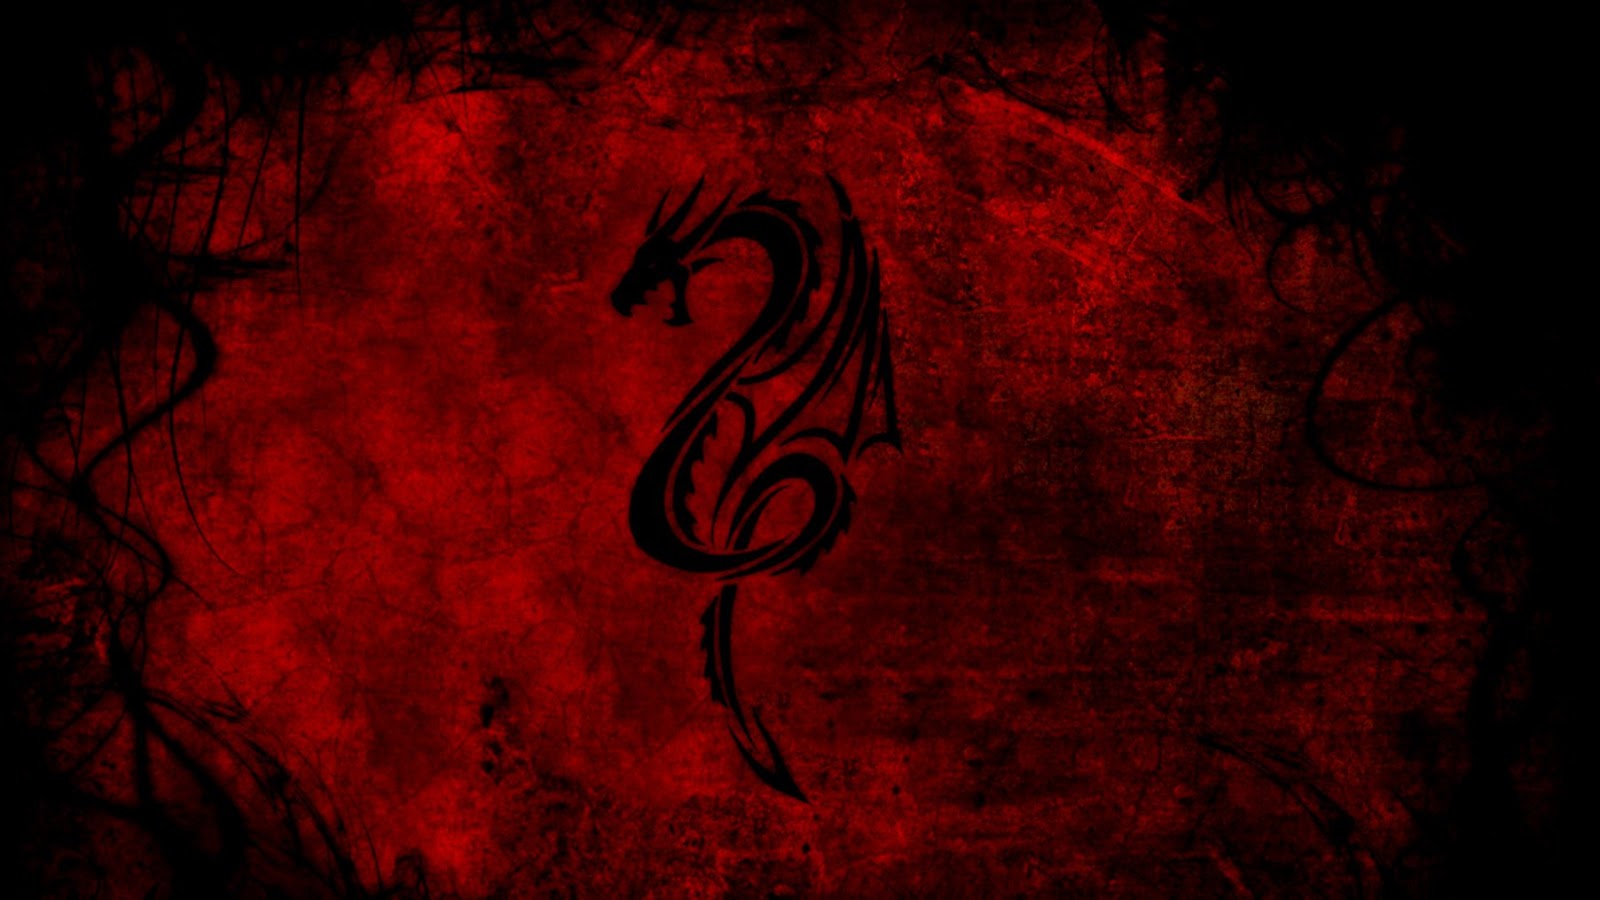 Red Dragon Wallpaper | Free Hd Wallpapers